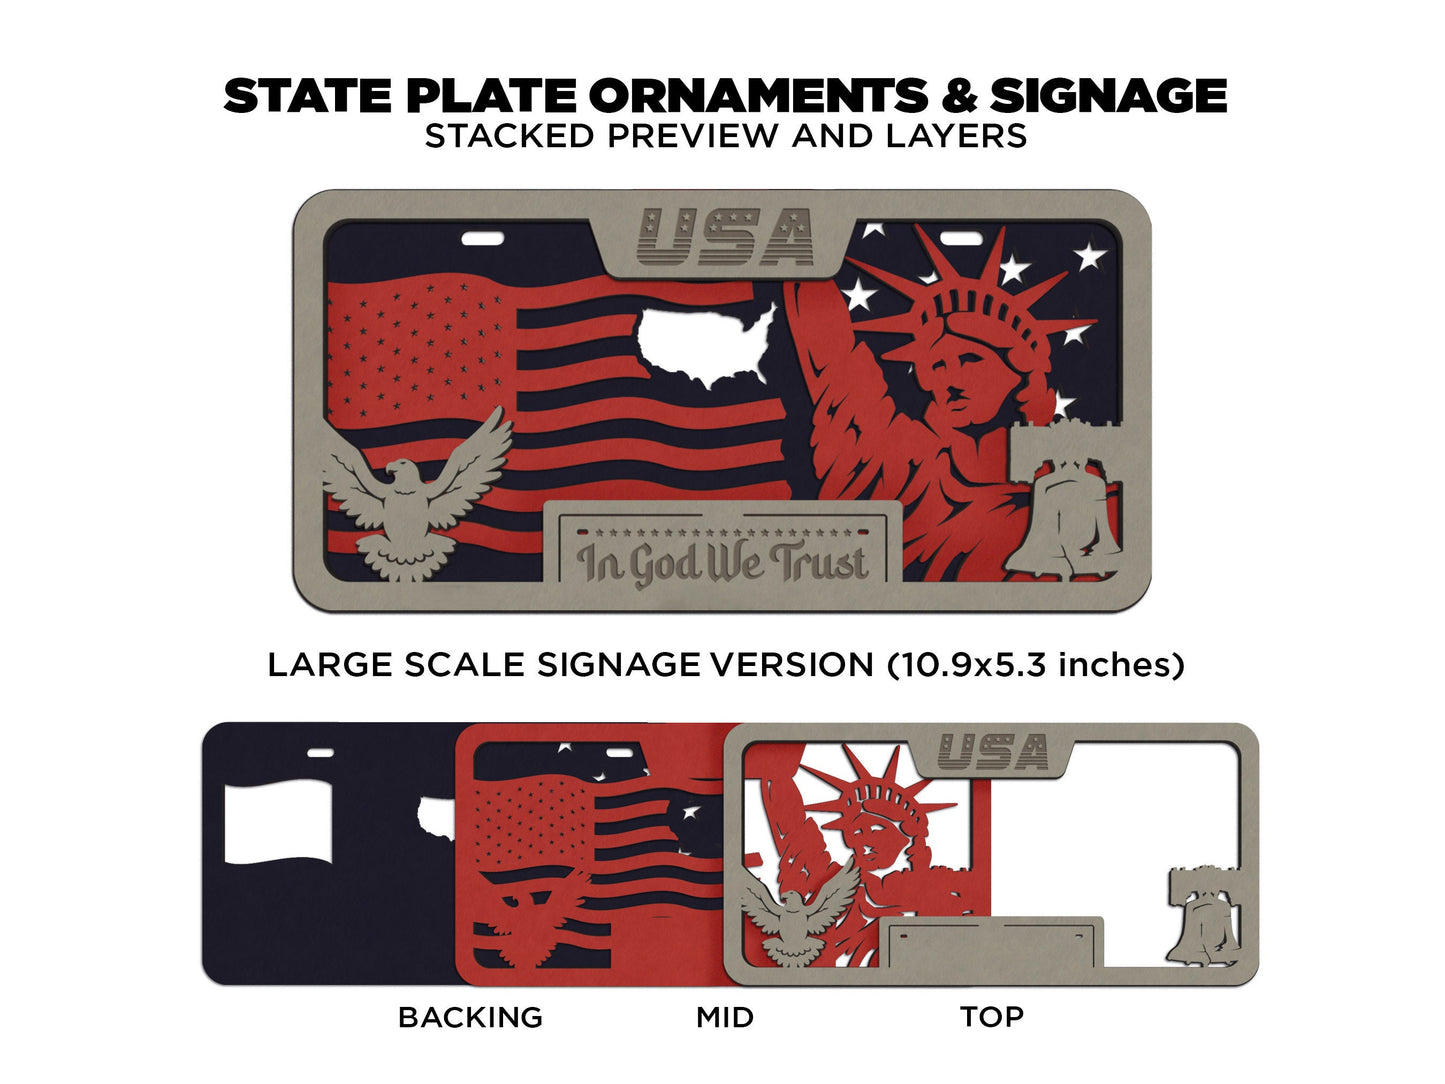 Louisiana State Plate Ornament and Signage - SVG File Download - Sized for Glowforge - Laser Ready Digital Files